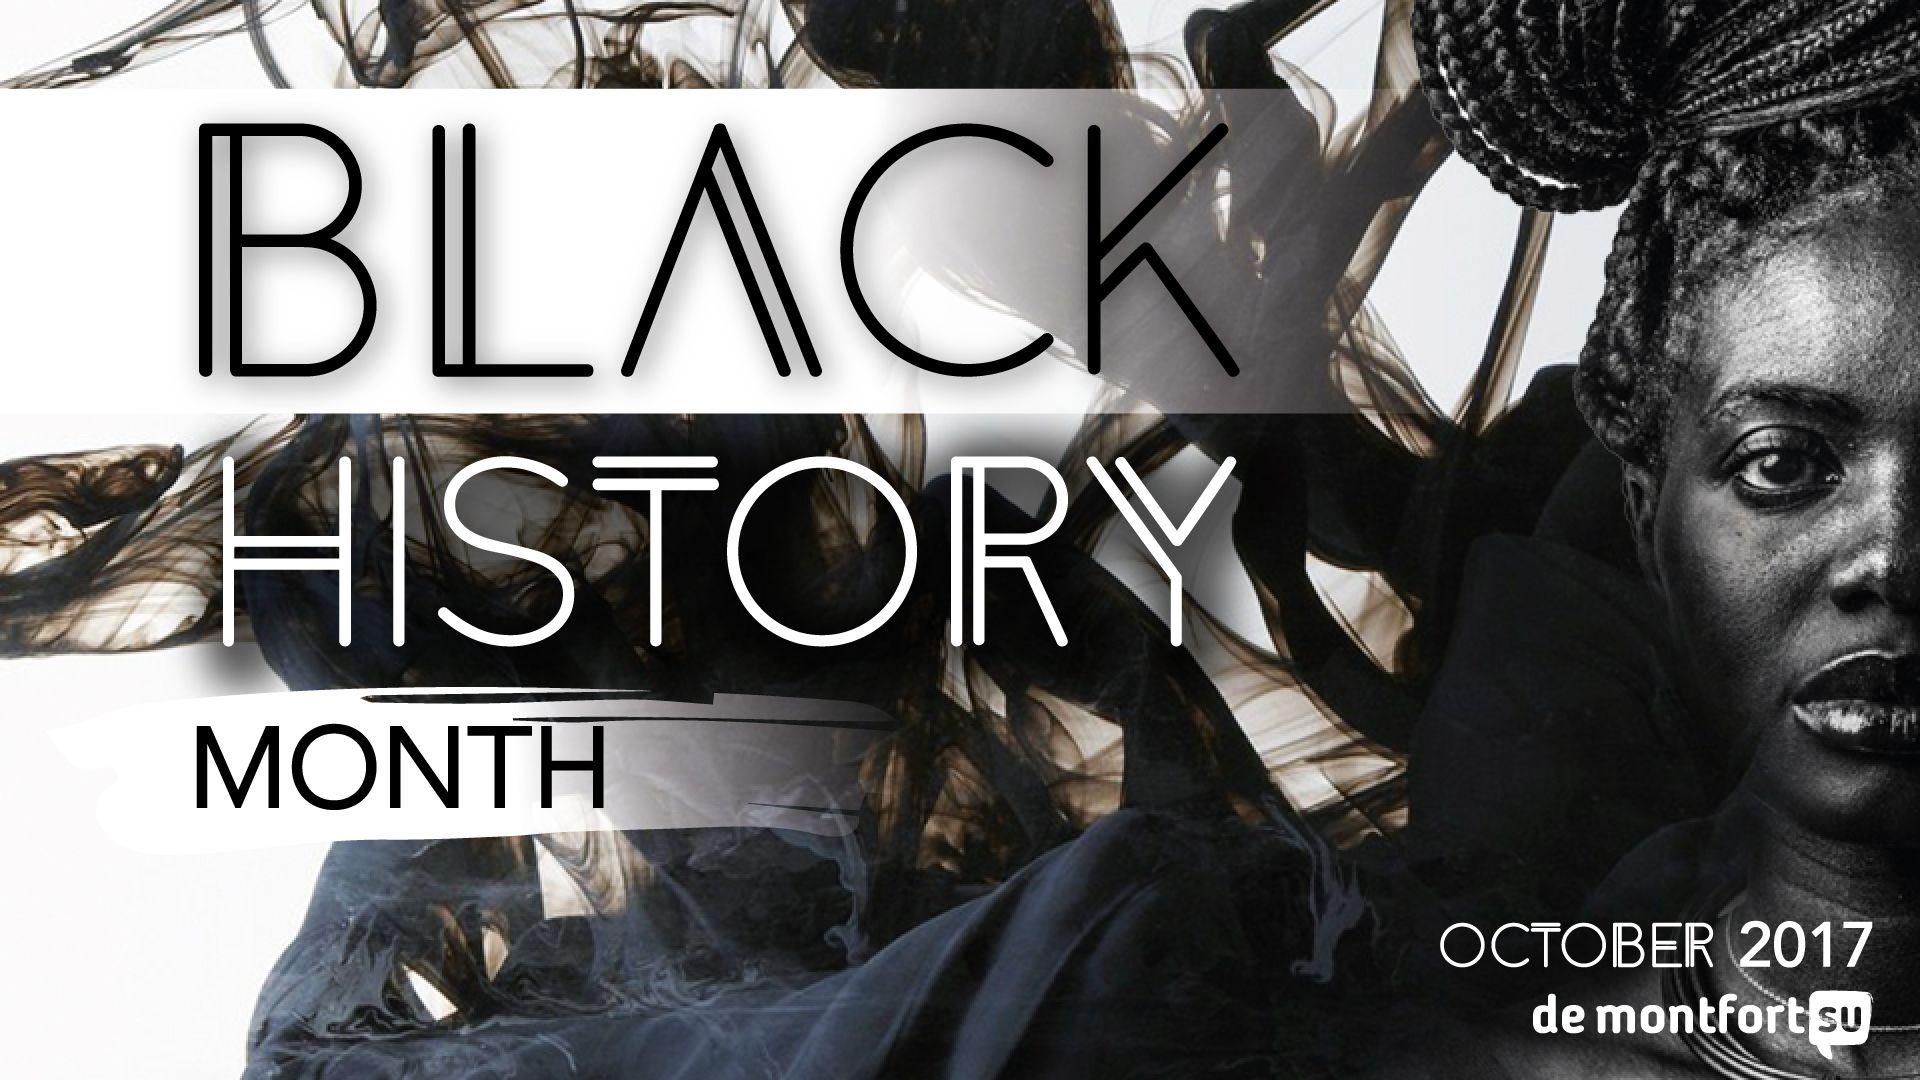 Join the celebration at Black History Month 2017